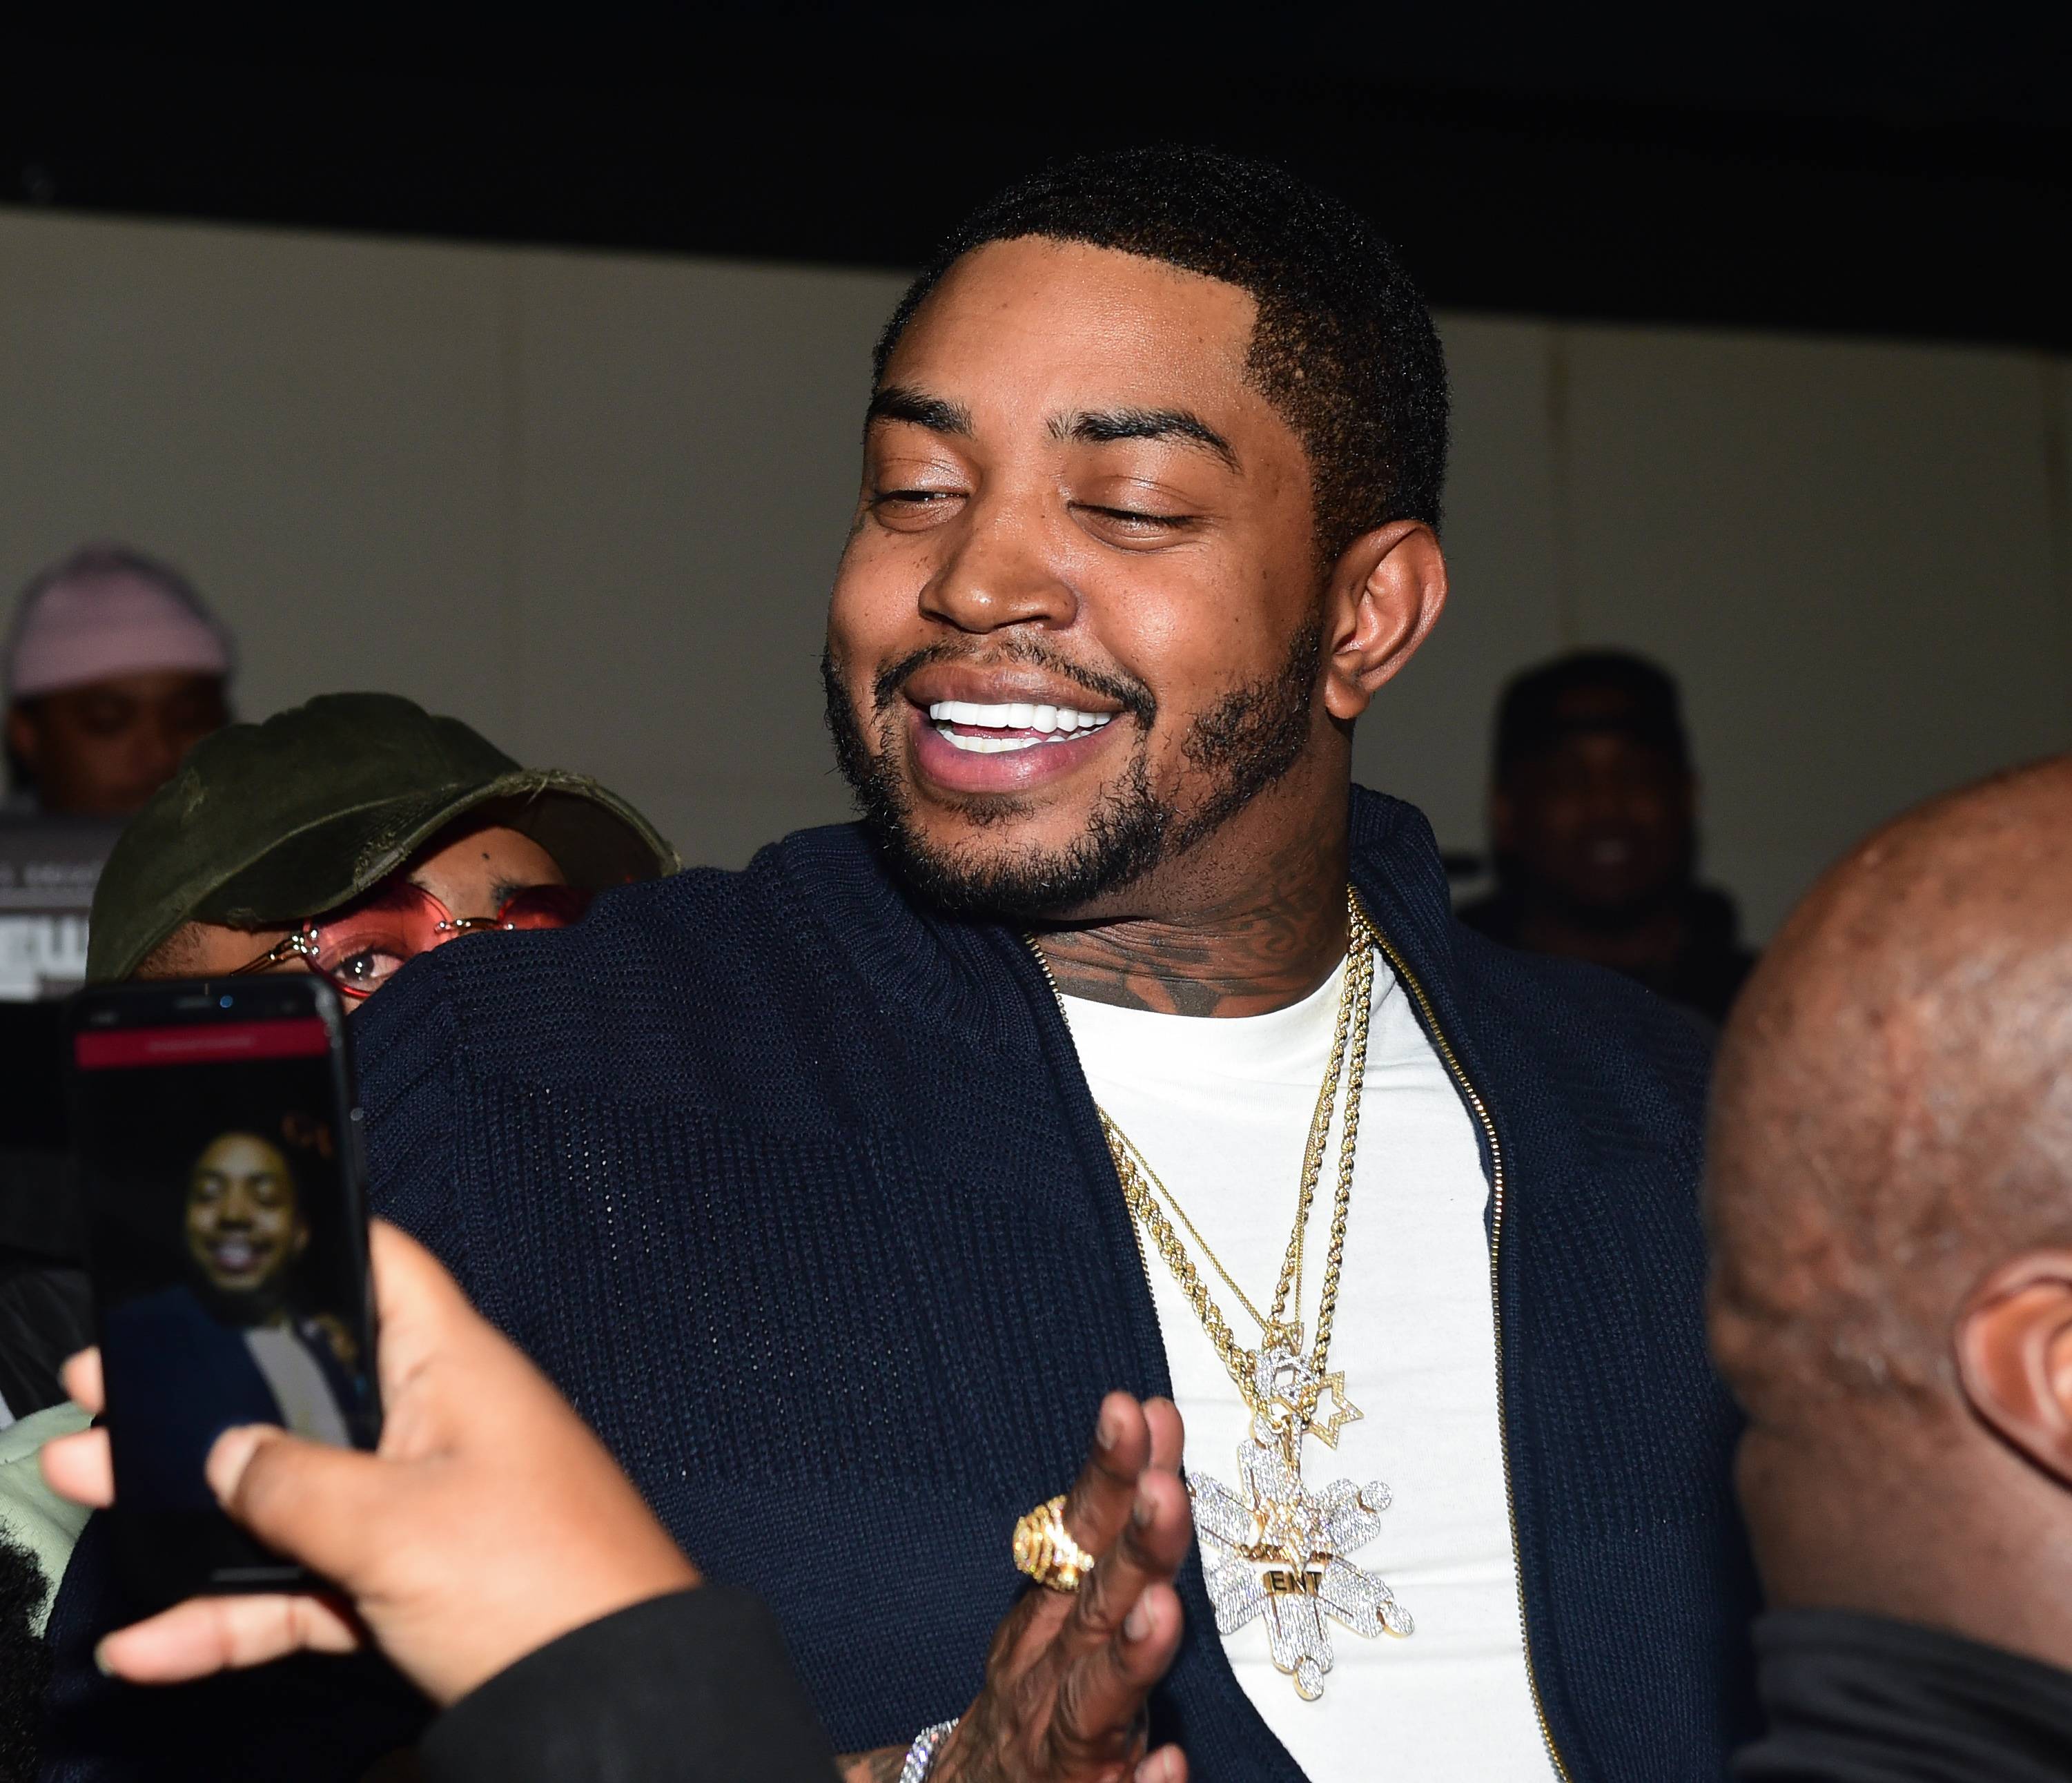 ATLANTA, GA - JANUARY 17: Lil Scrappy attends his Birthday Party at Gold Room on January 17, 2020 in Atlanta, Georgia.(Photo by Prince Williams/Wireimage)